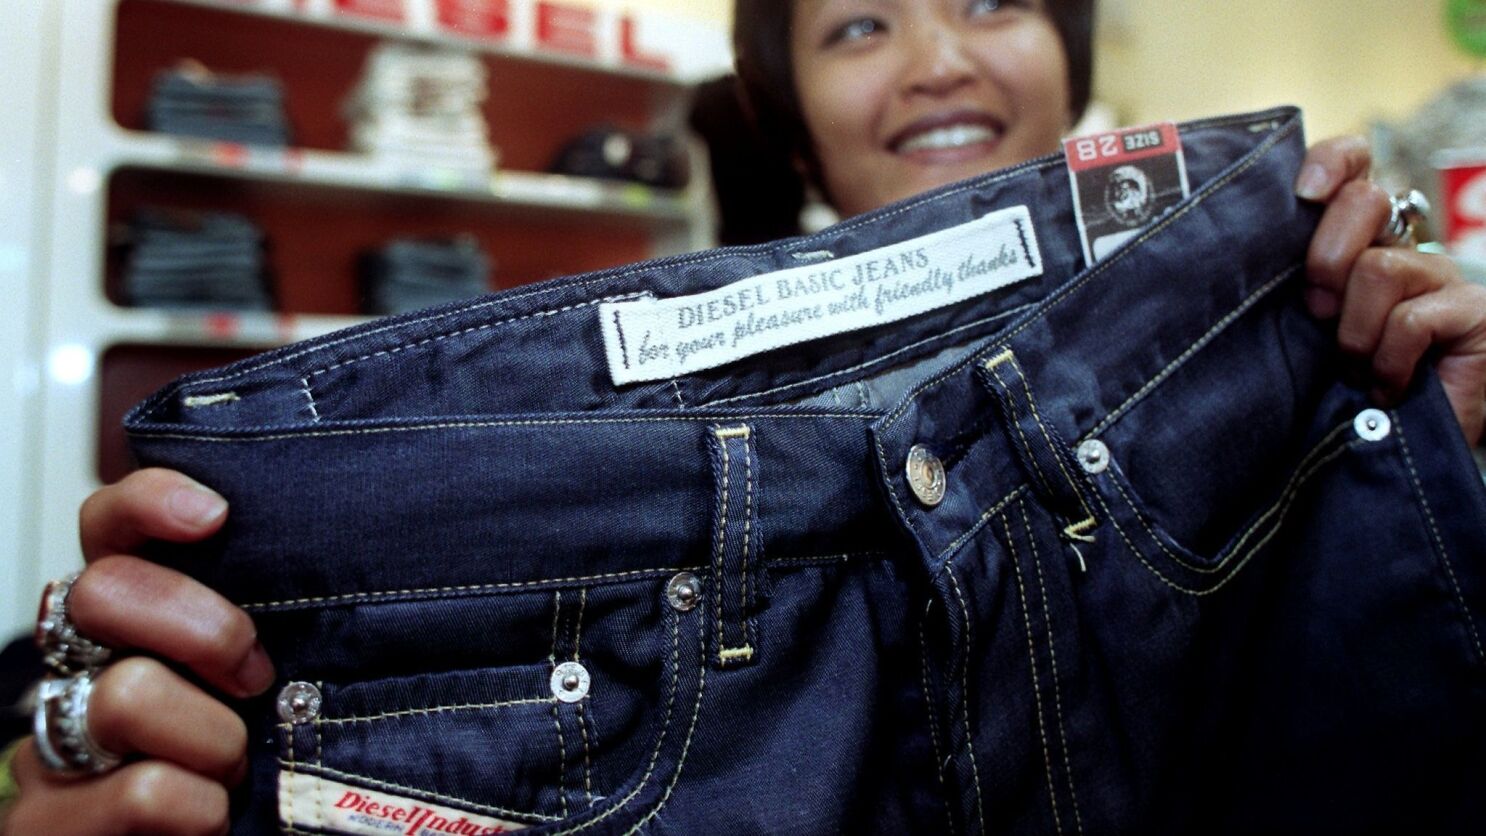 Jeans Brand Diesel Usa Files For Chapter 11 Bankruptcy Los Angeles Times